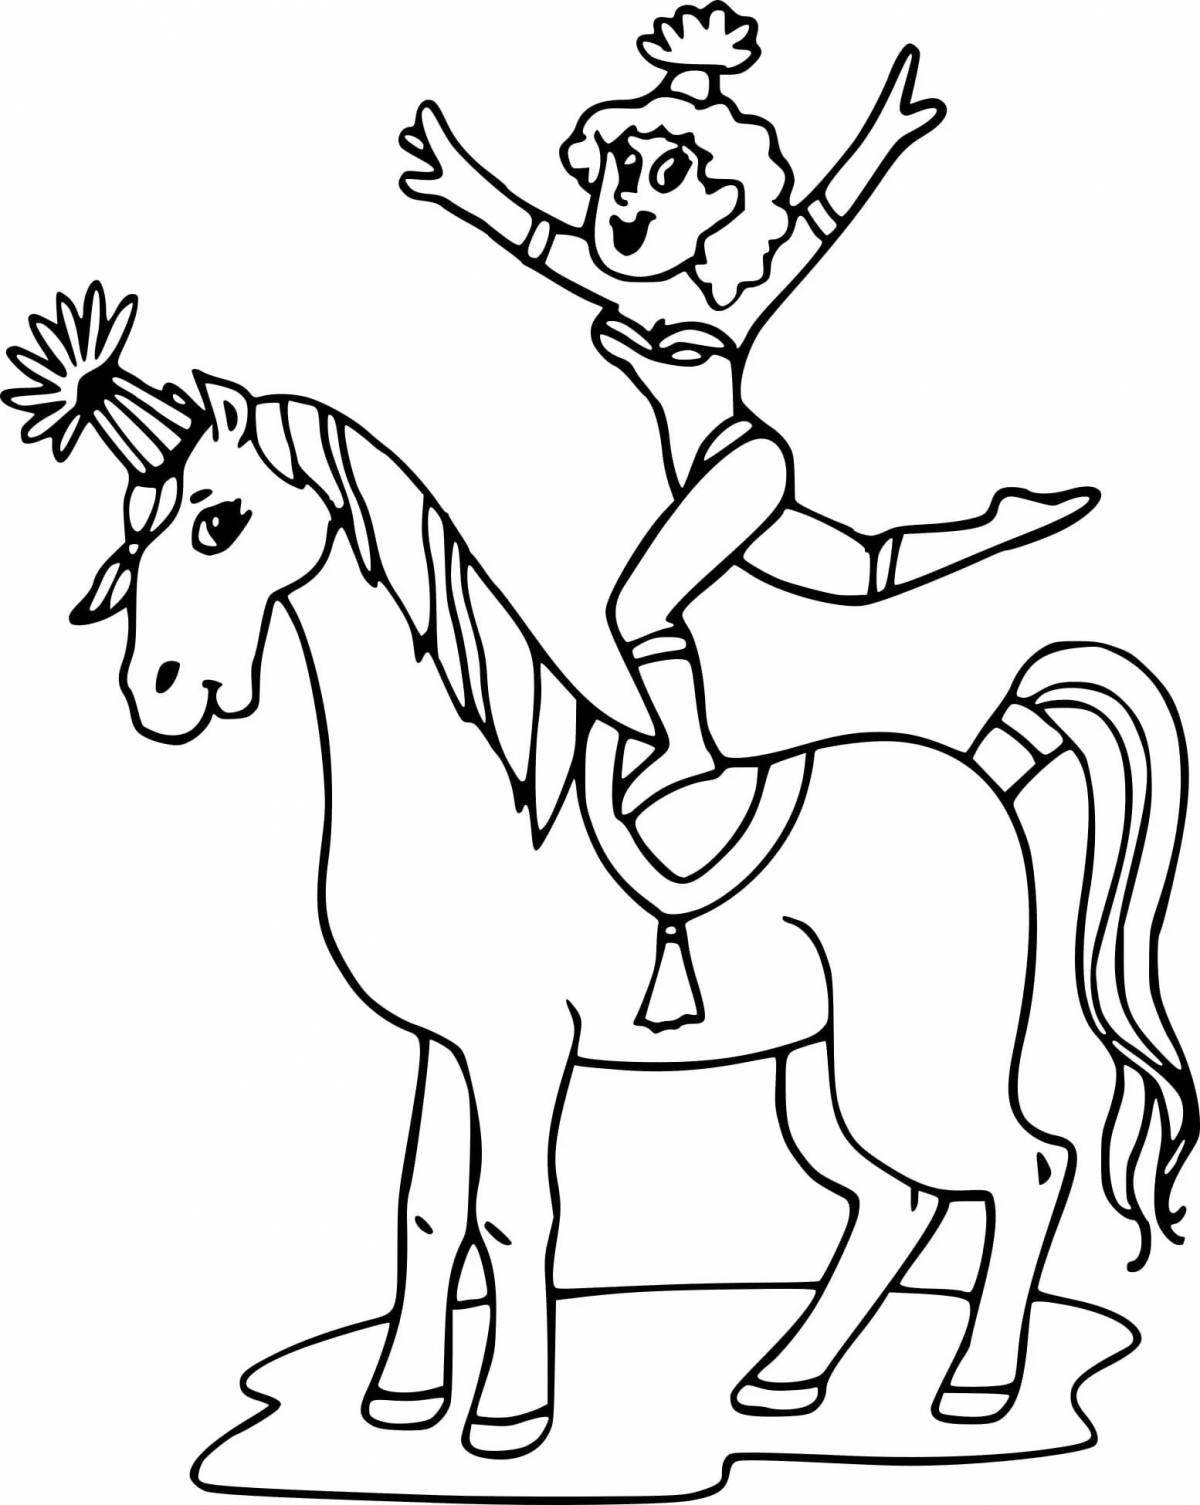 Outstanding circus coloring book for kids